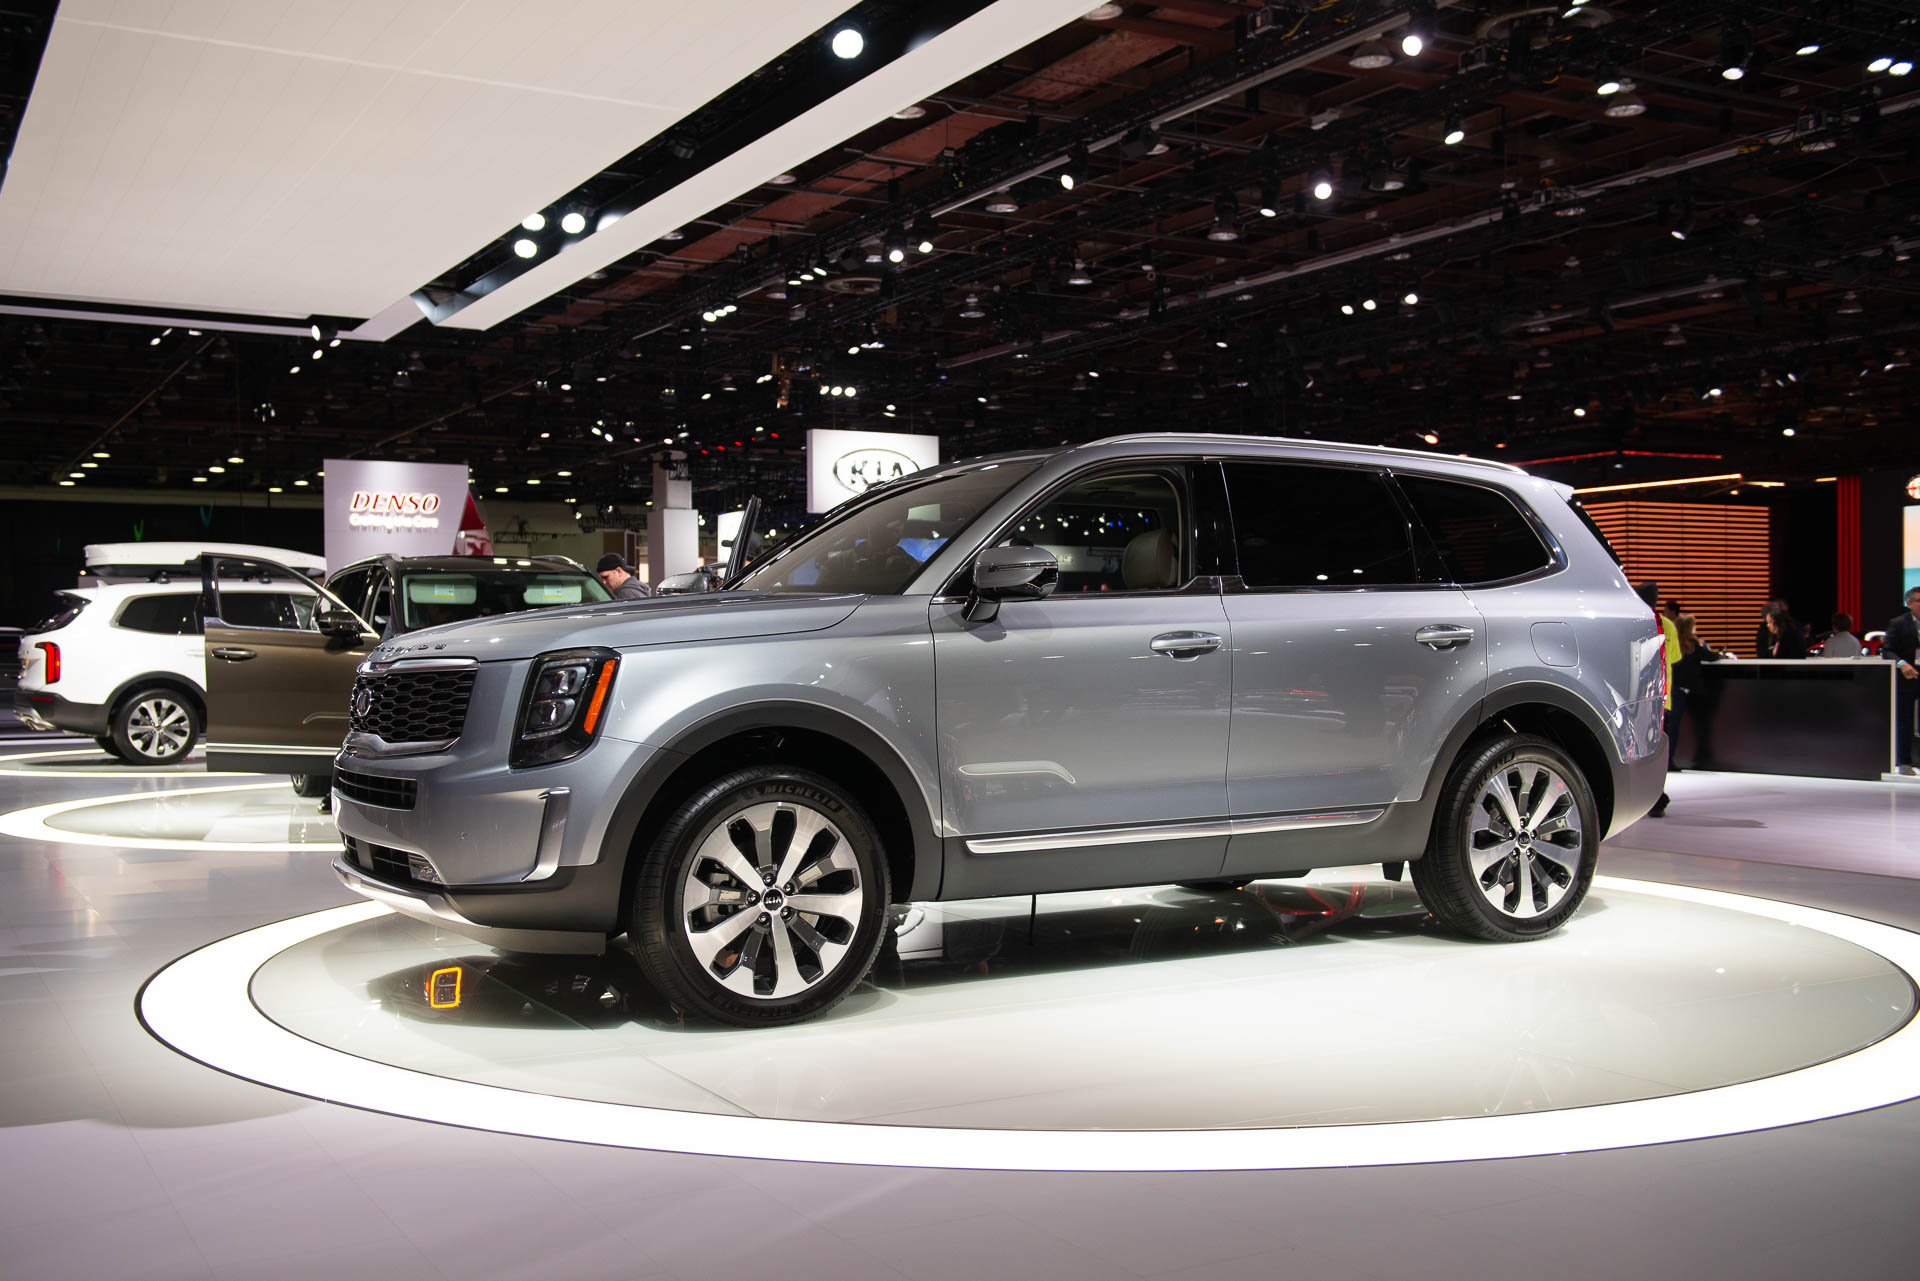 2020 Kia Telluride arrives this spring, will cost $32,735